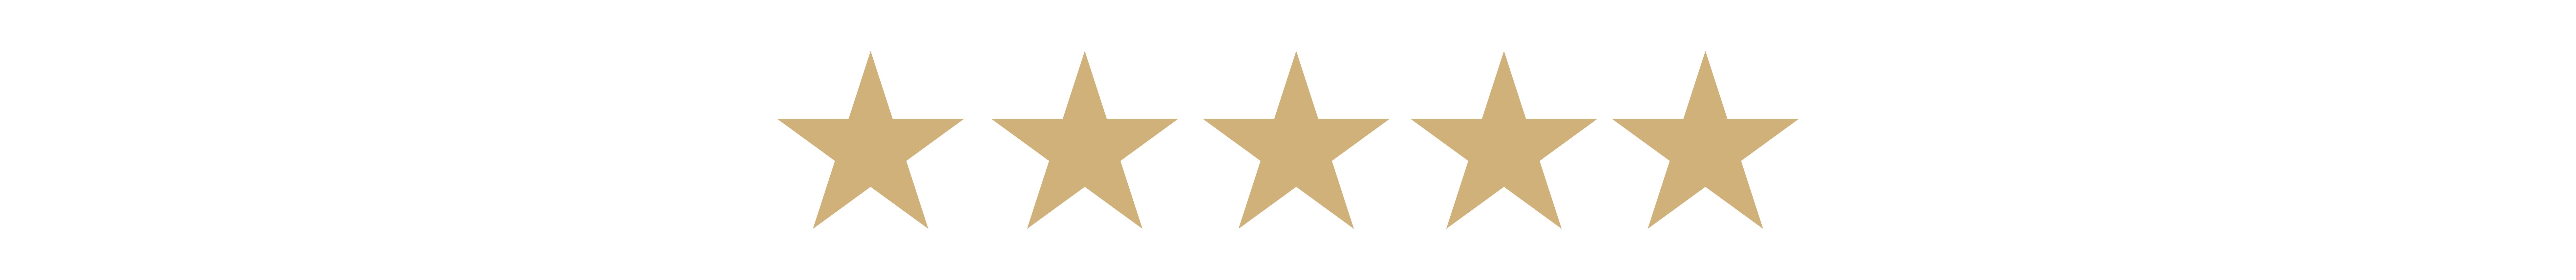 5 STARS REVIEW ICON